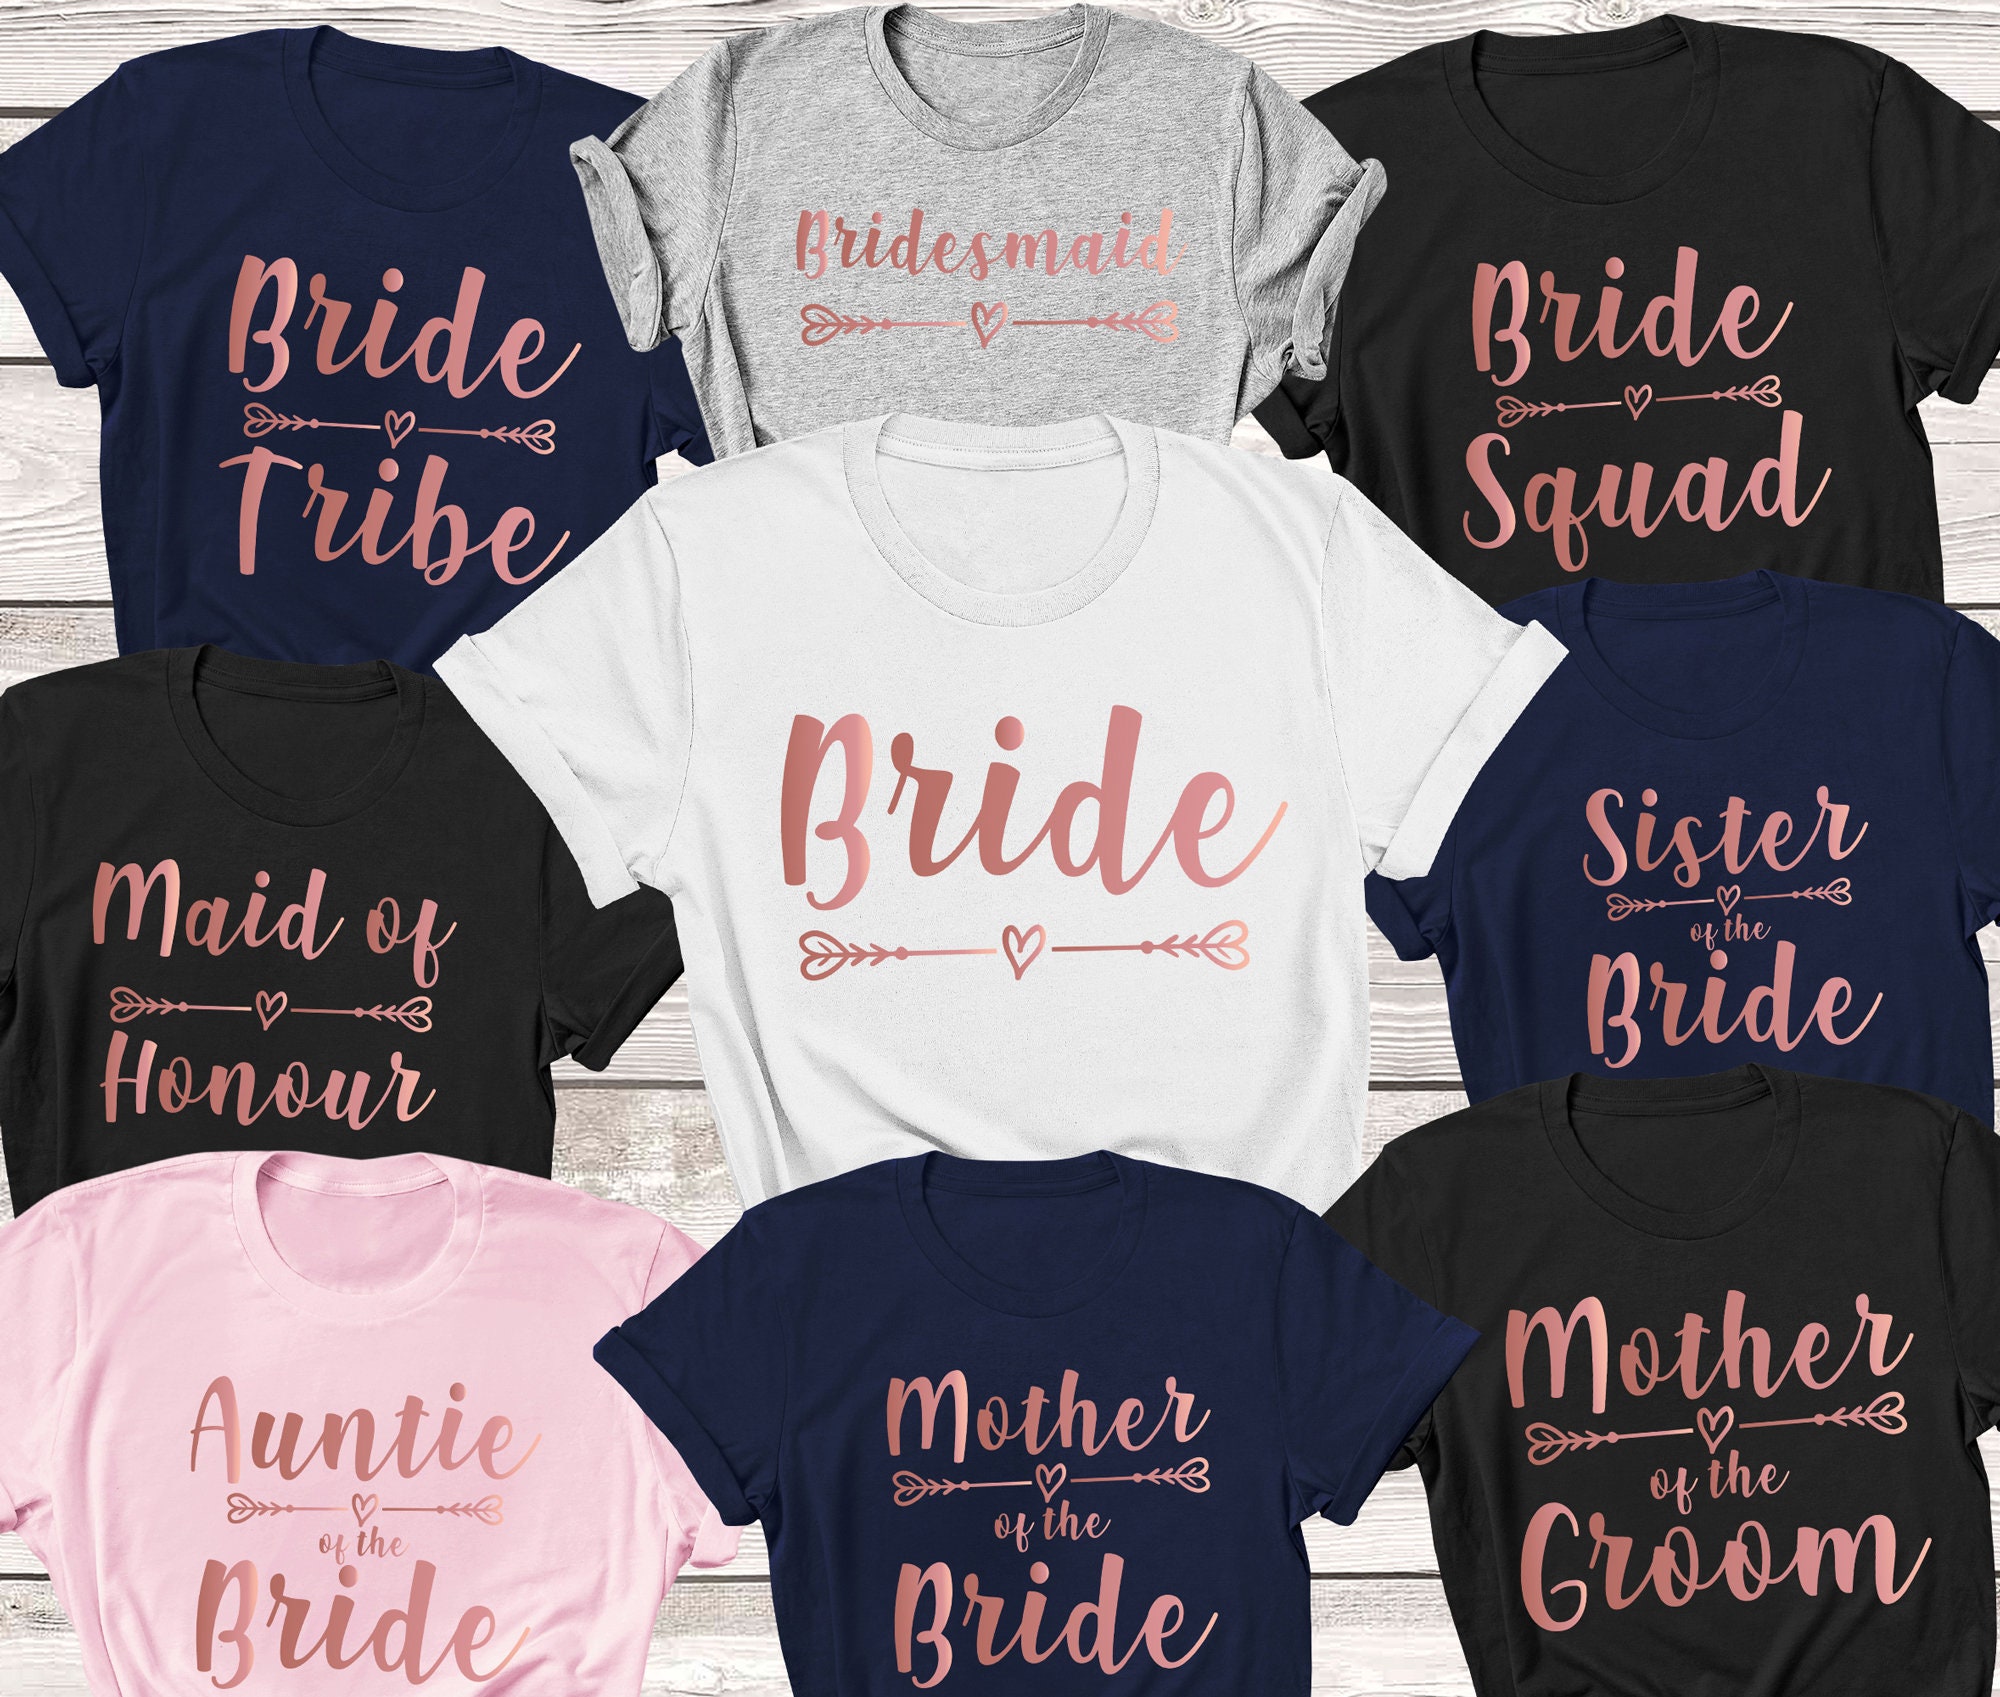 Wedding Party T Shirts Bride Shirt Bride Tribe Shirt Bride Squad Shirt  Mother of the Bride Shirt Sister Auntie Bride Maid of Honour Shirts 